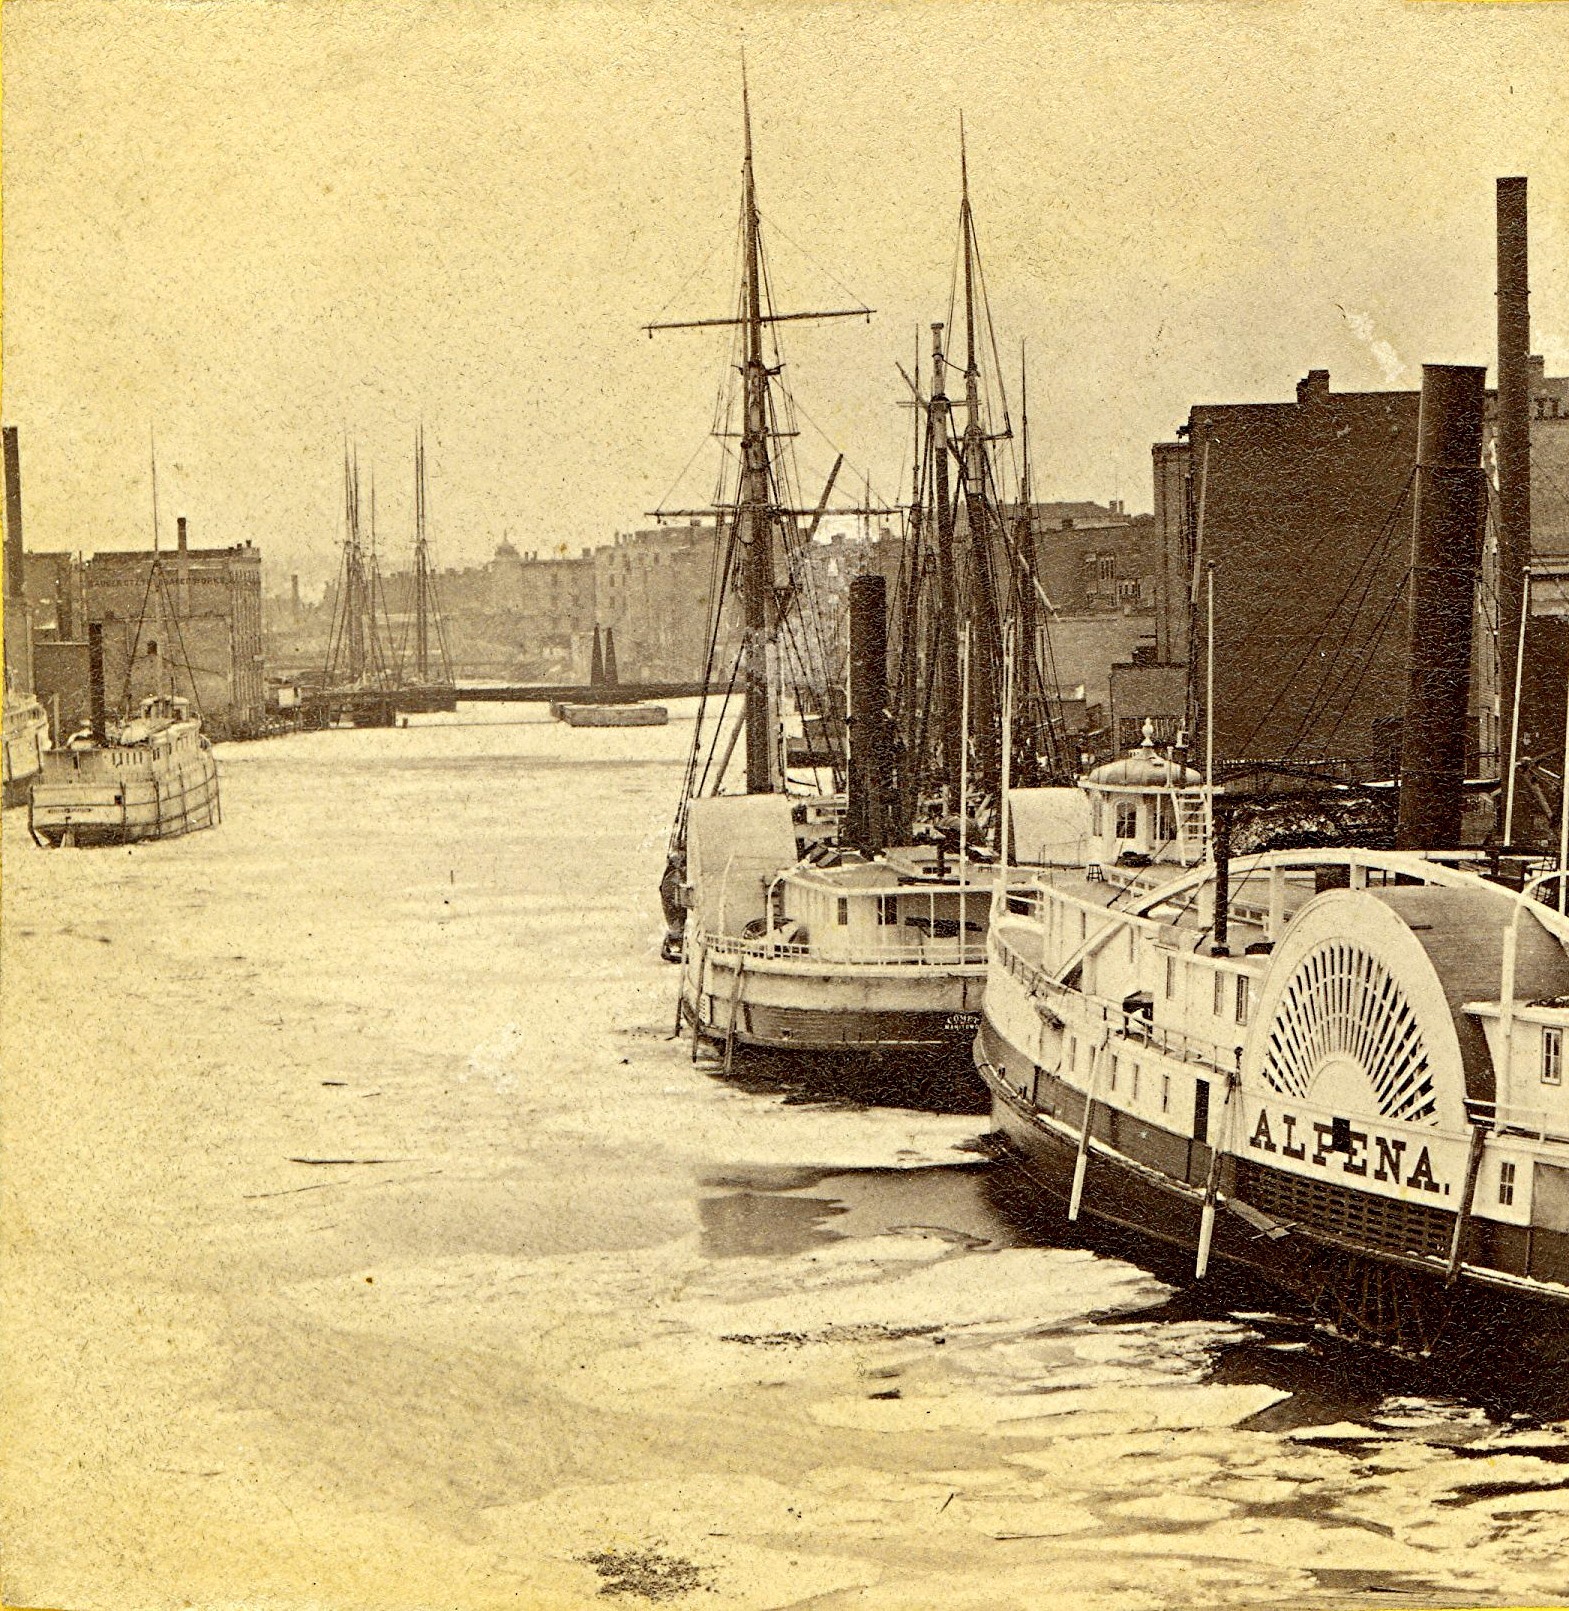 Sailing Vessels and Steamers, 1860s. Image courtesy of Jeff Beutner.